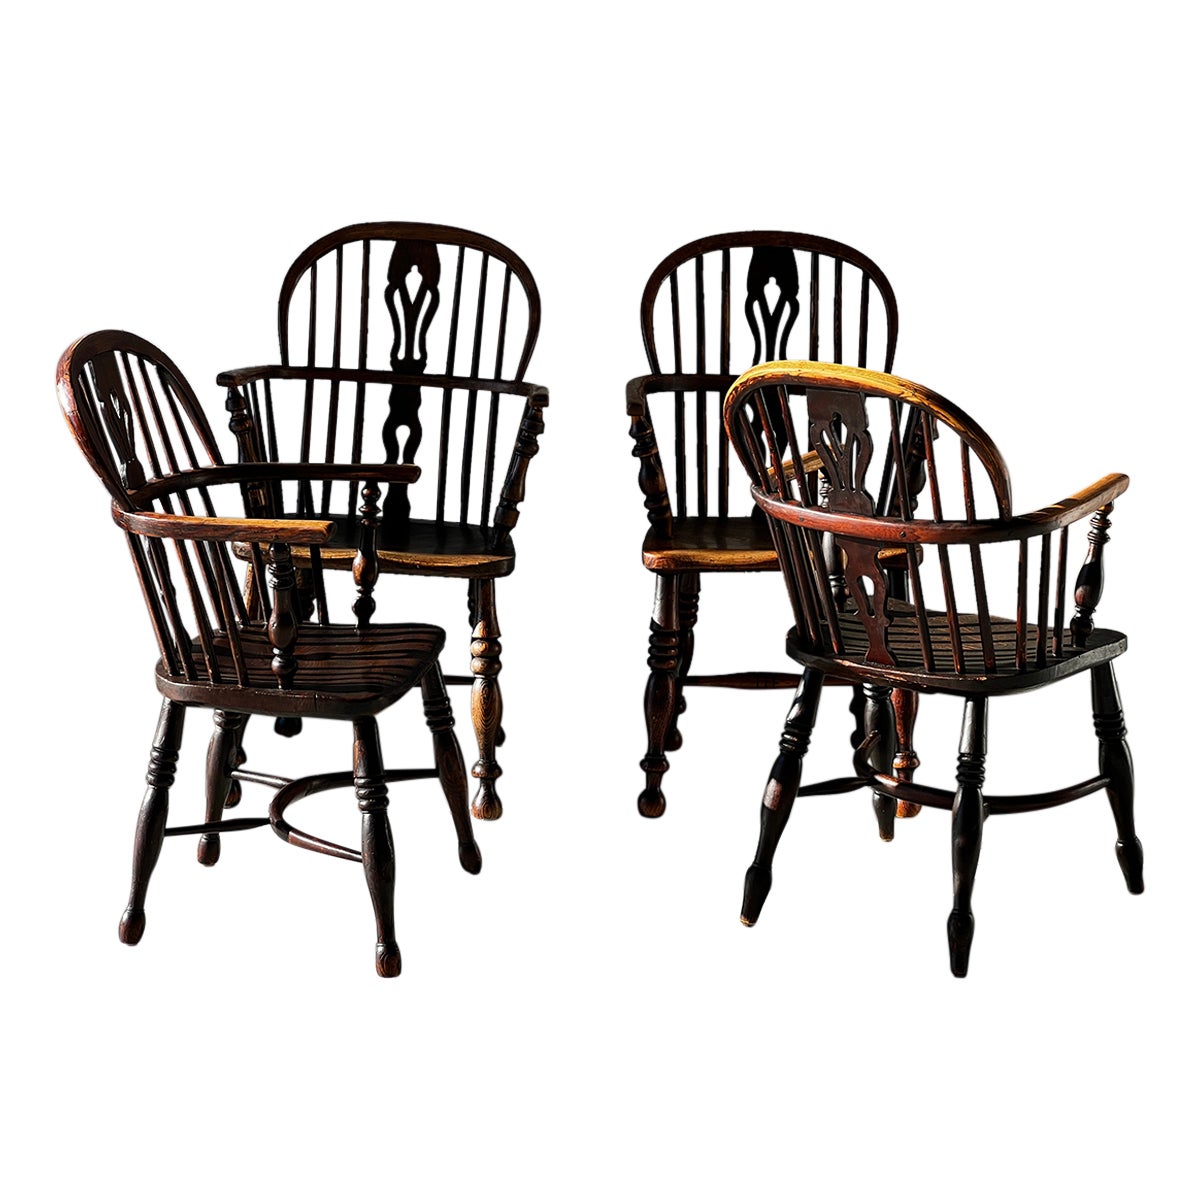 Set of 4 Windsor armchairs in turned and carved wood 19th century 